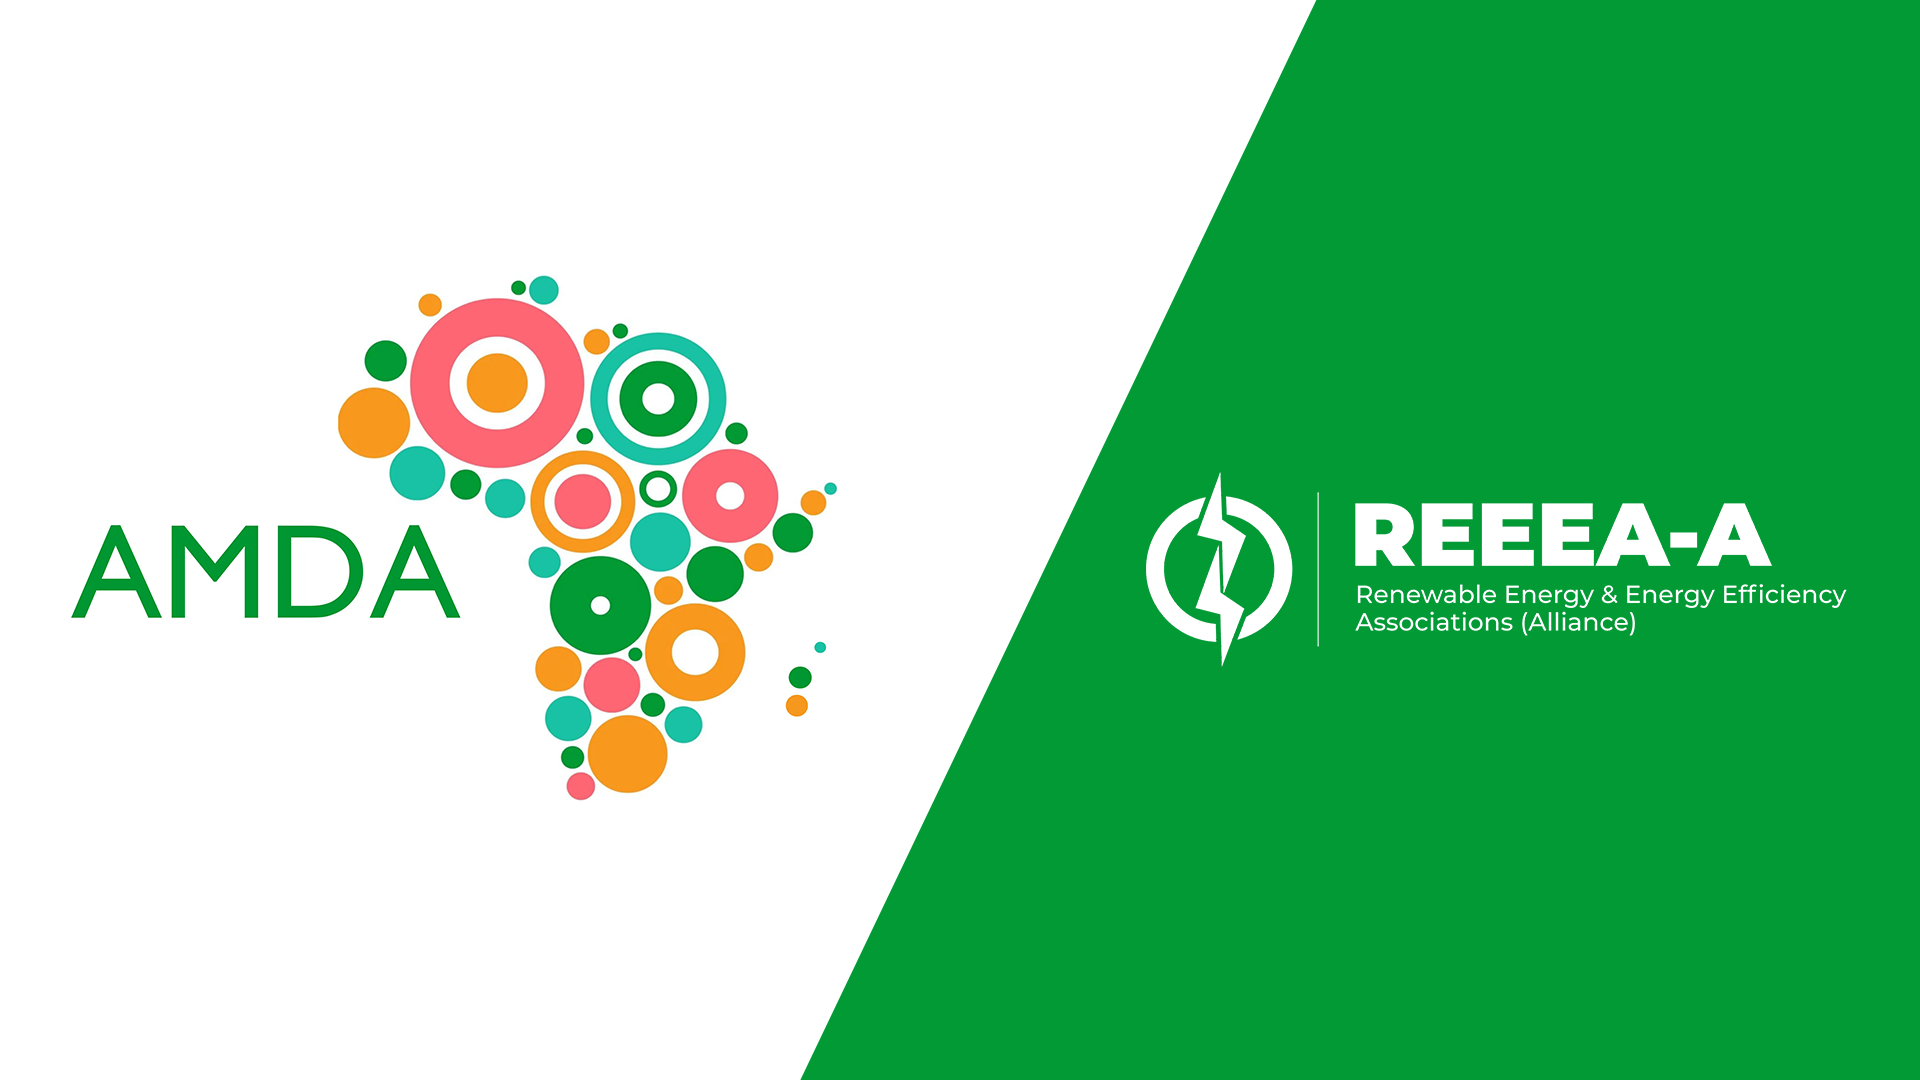 You are currently viewing The Africa Minigrid Developers Association And Nigeria’s Renewable Energy & Energy Efficiency Associations-Alliance (REEEA-A) Join Forces To Further Their Efforts Towards Promoting Mini-Grids And Decentralized Utilities For Rural Electrification.